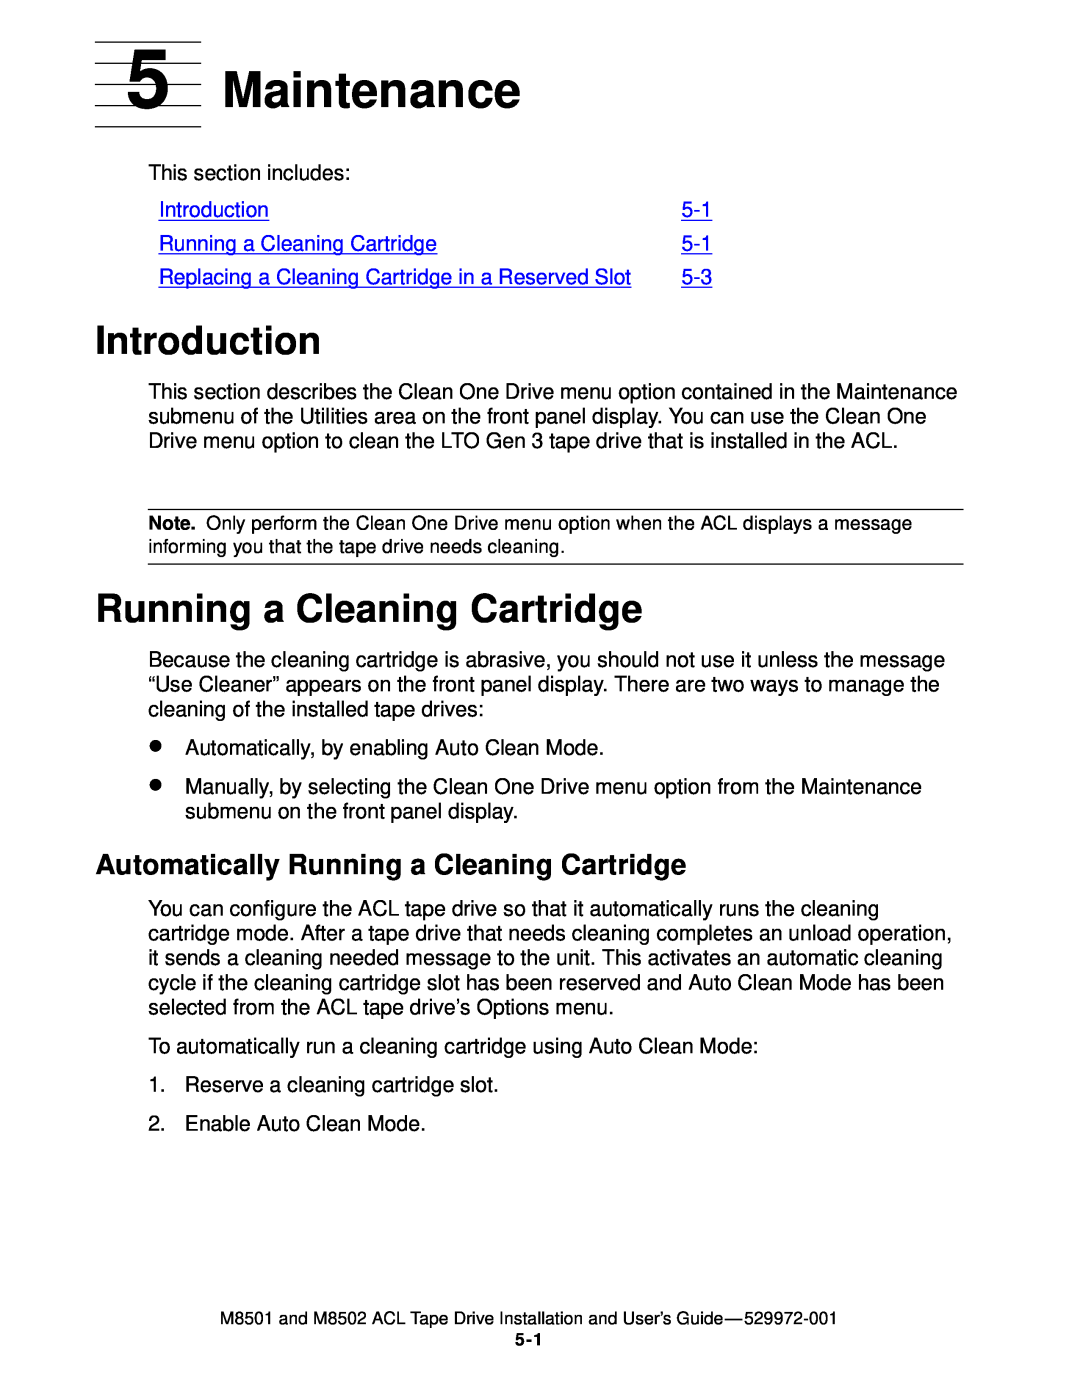 SMC Networks M8501 manual Maintenance, Introduction, Automatically Running a Cleaning Cartridge 